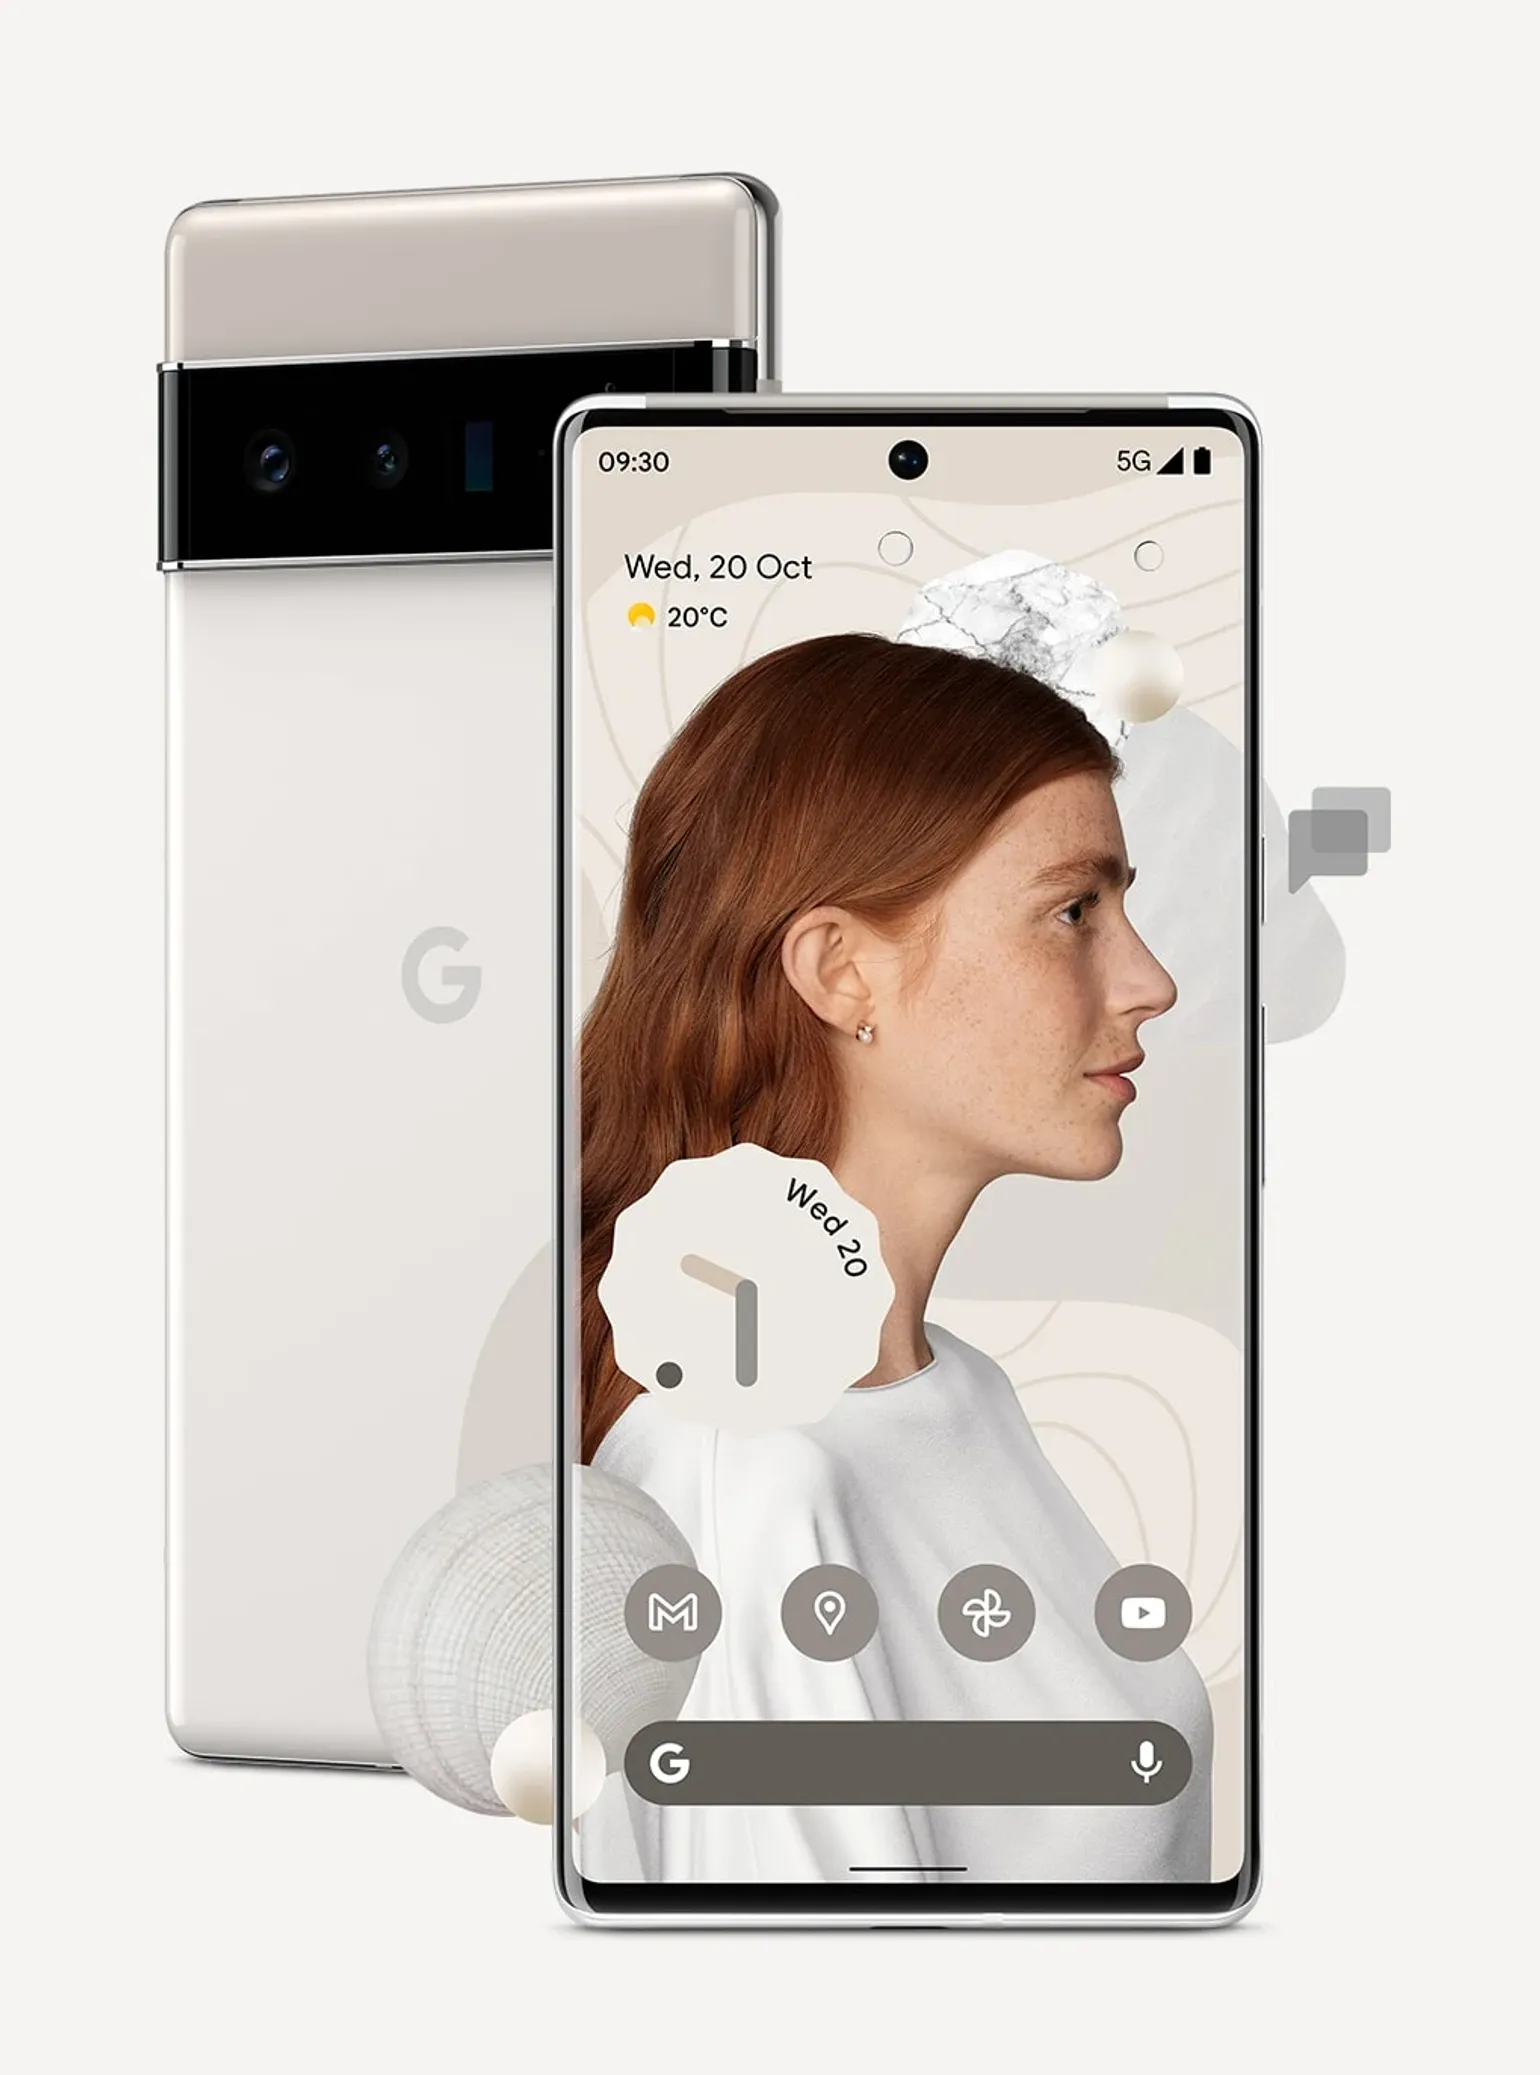 Google confirms Wi-Fi and Bluetooth problems with Pixel 6, promises fix in March